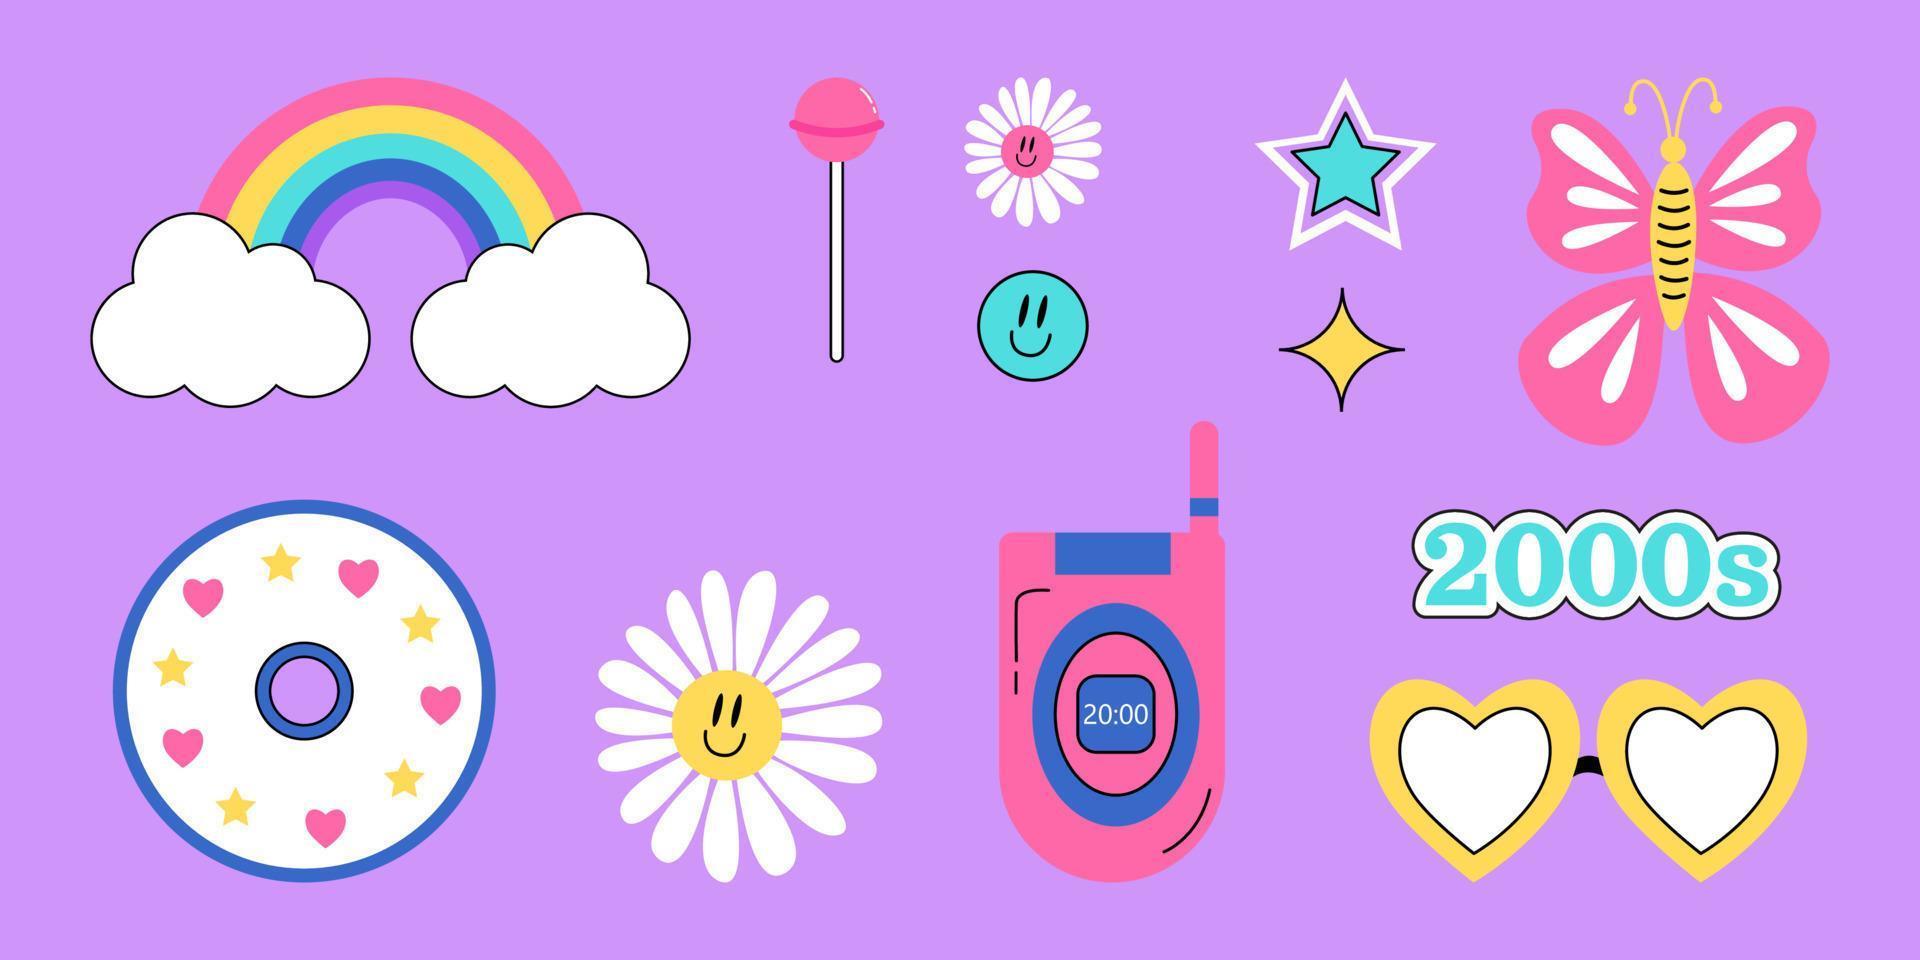 psychedelic set stickers. Trippy daisies, rainbow, smile, lollypop, stars, butterfly, compact disc, mobile phone, glasses on purple background. Y2k vibes elements. Cartoon vector illustration